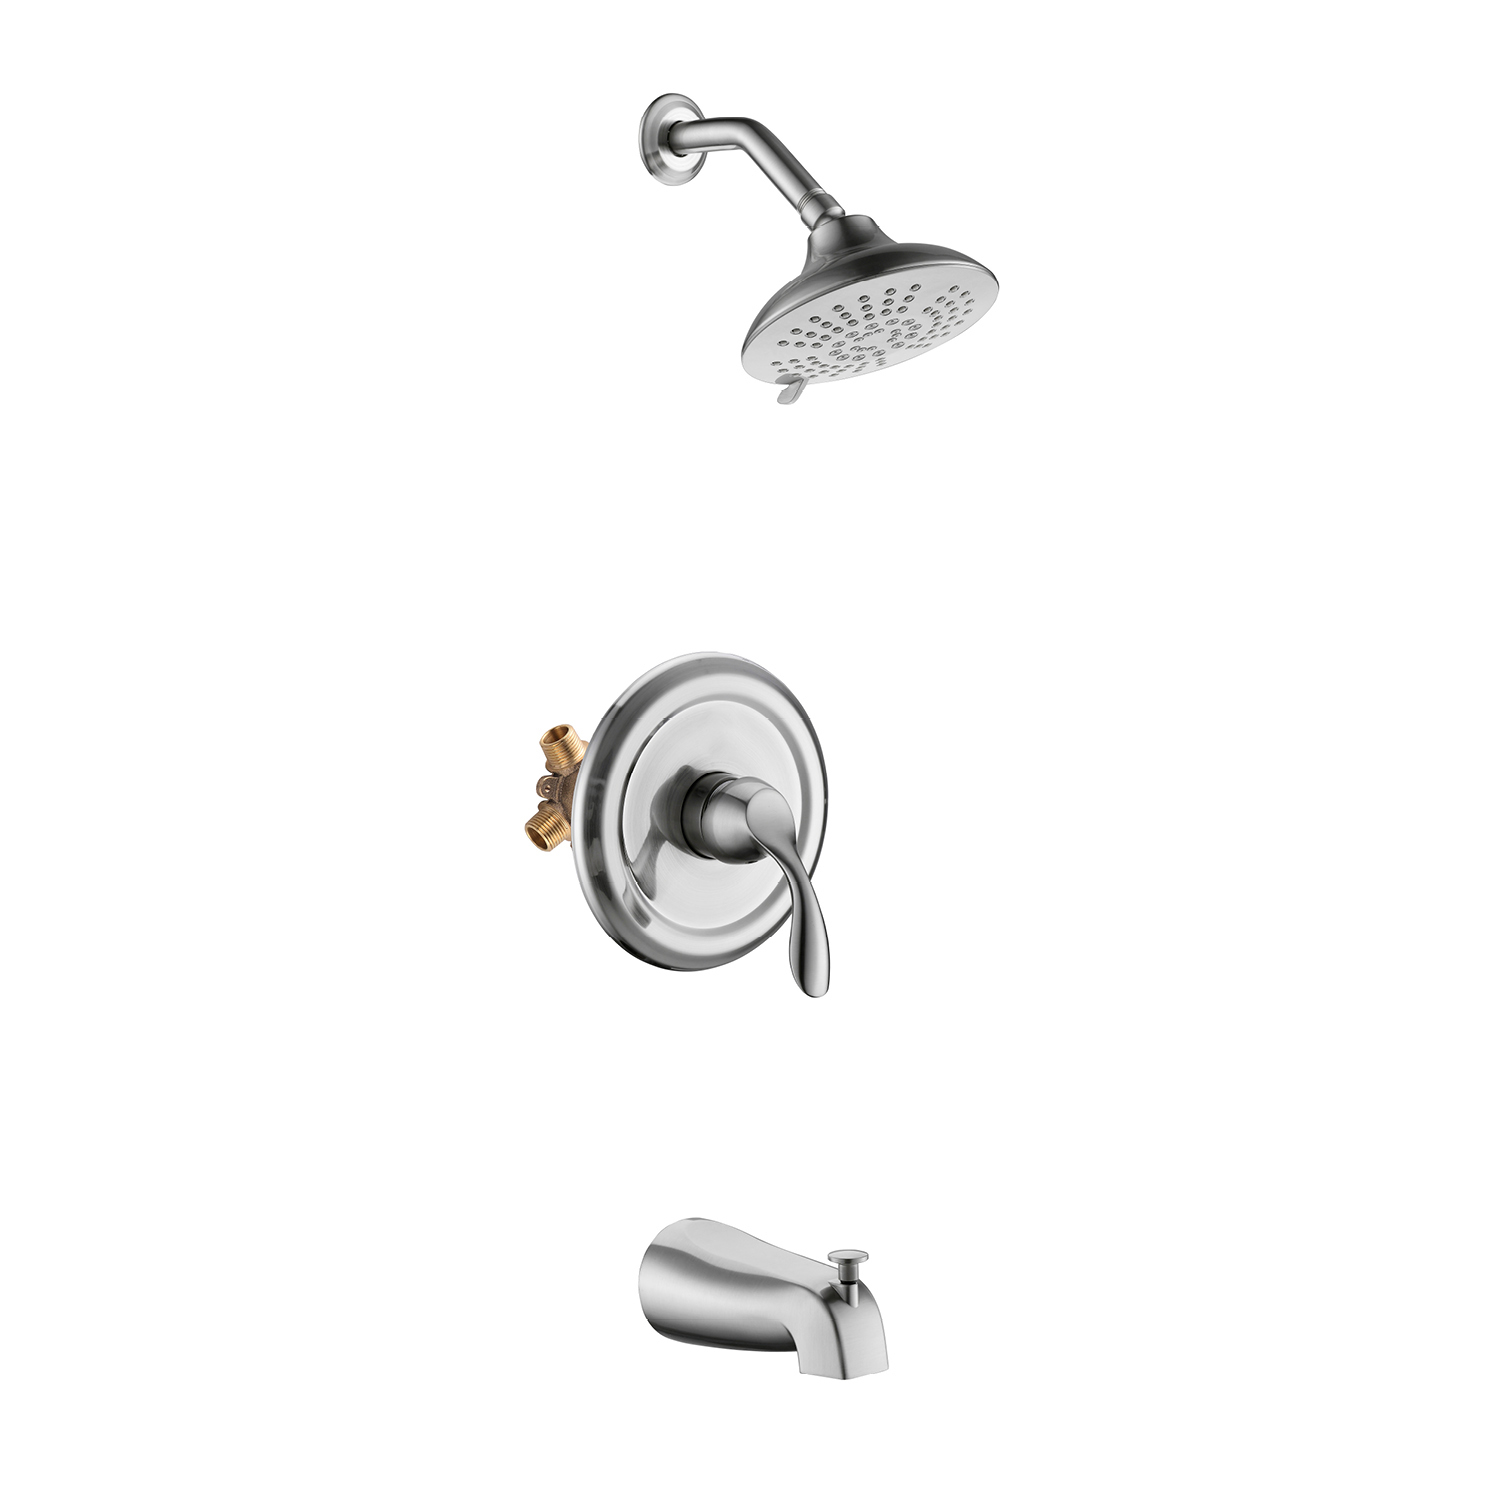 Looking for A Shower Faucet to Add Some Style to Your Bathroom